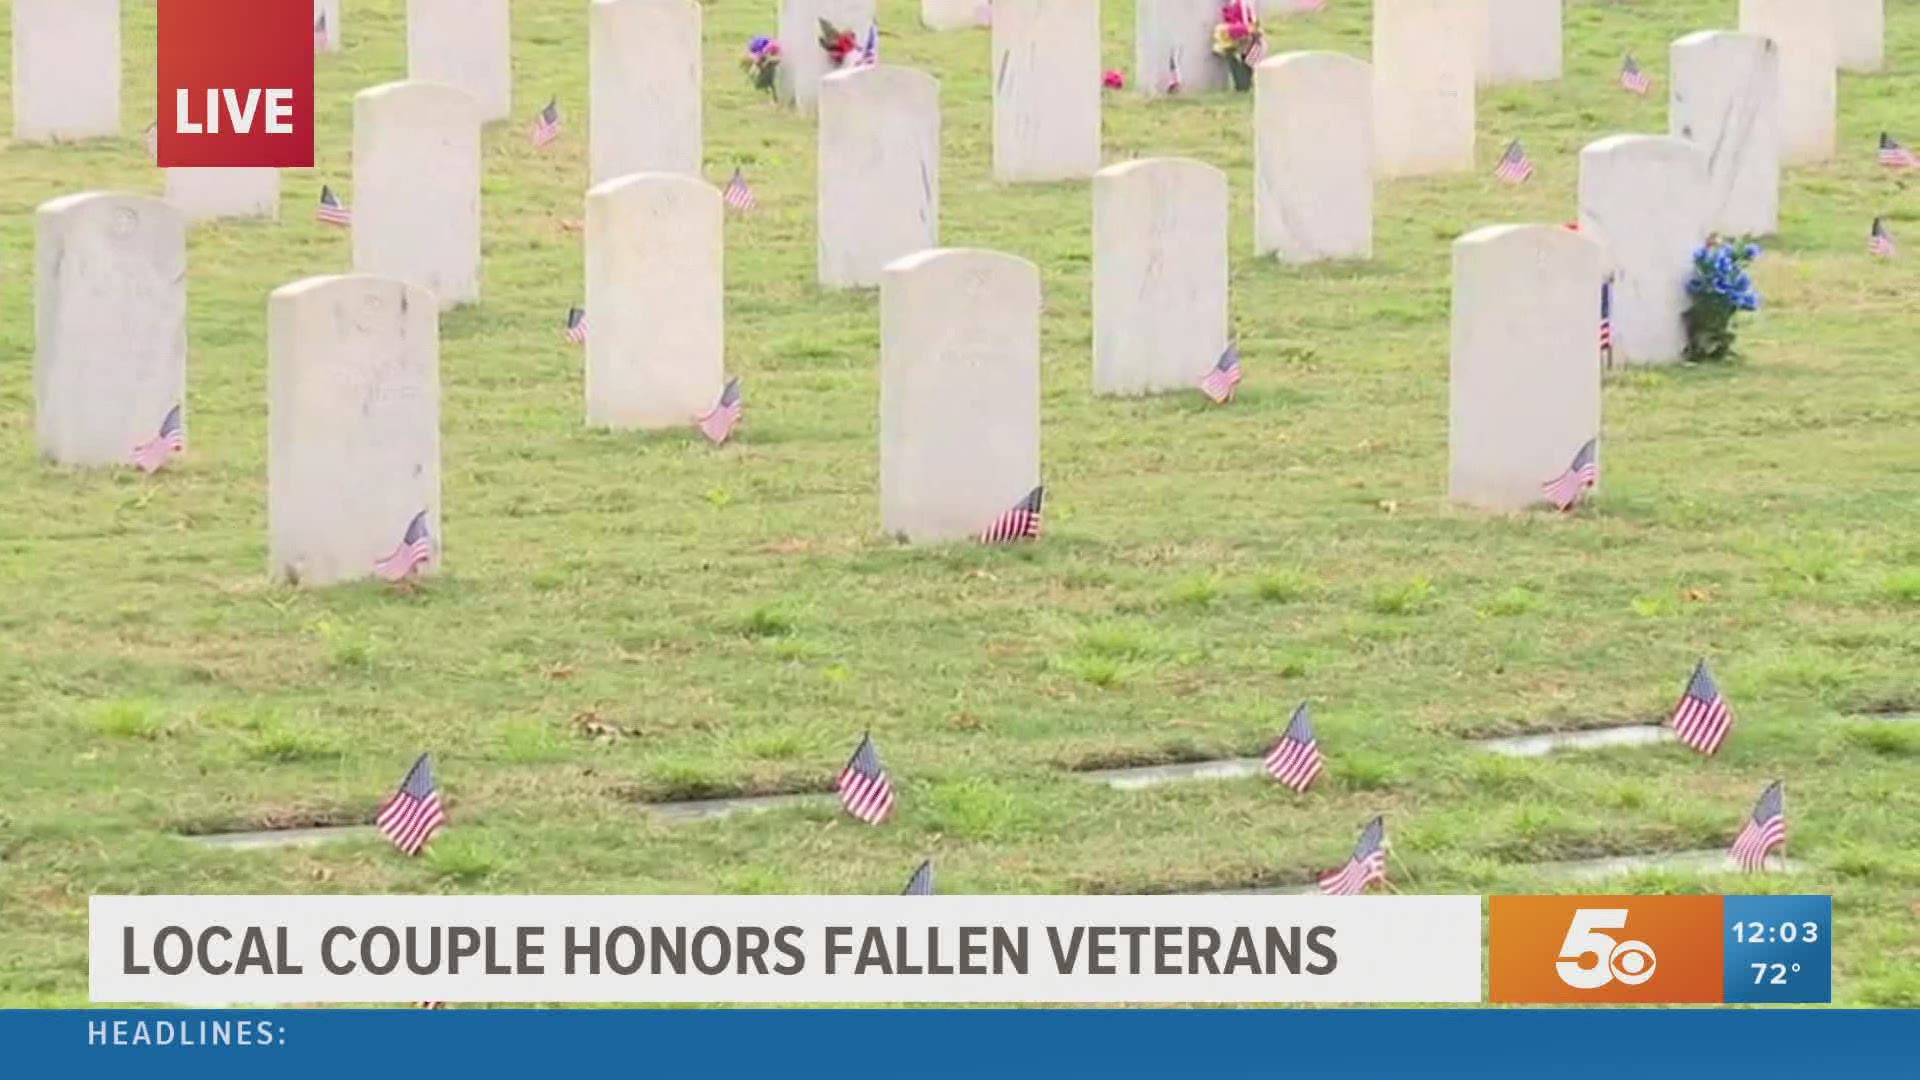 A retired Army Colonel and his wife bought flags to place on the tombstones at the National Cemetary.